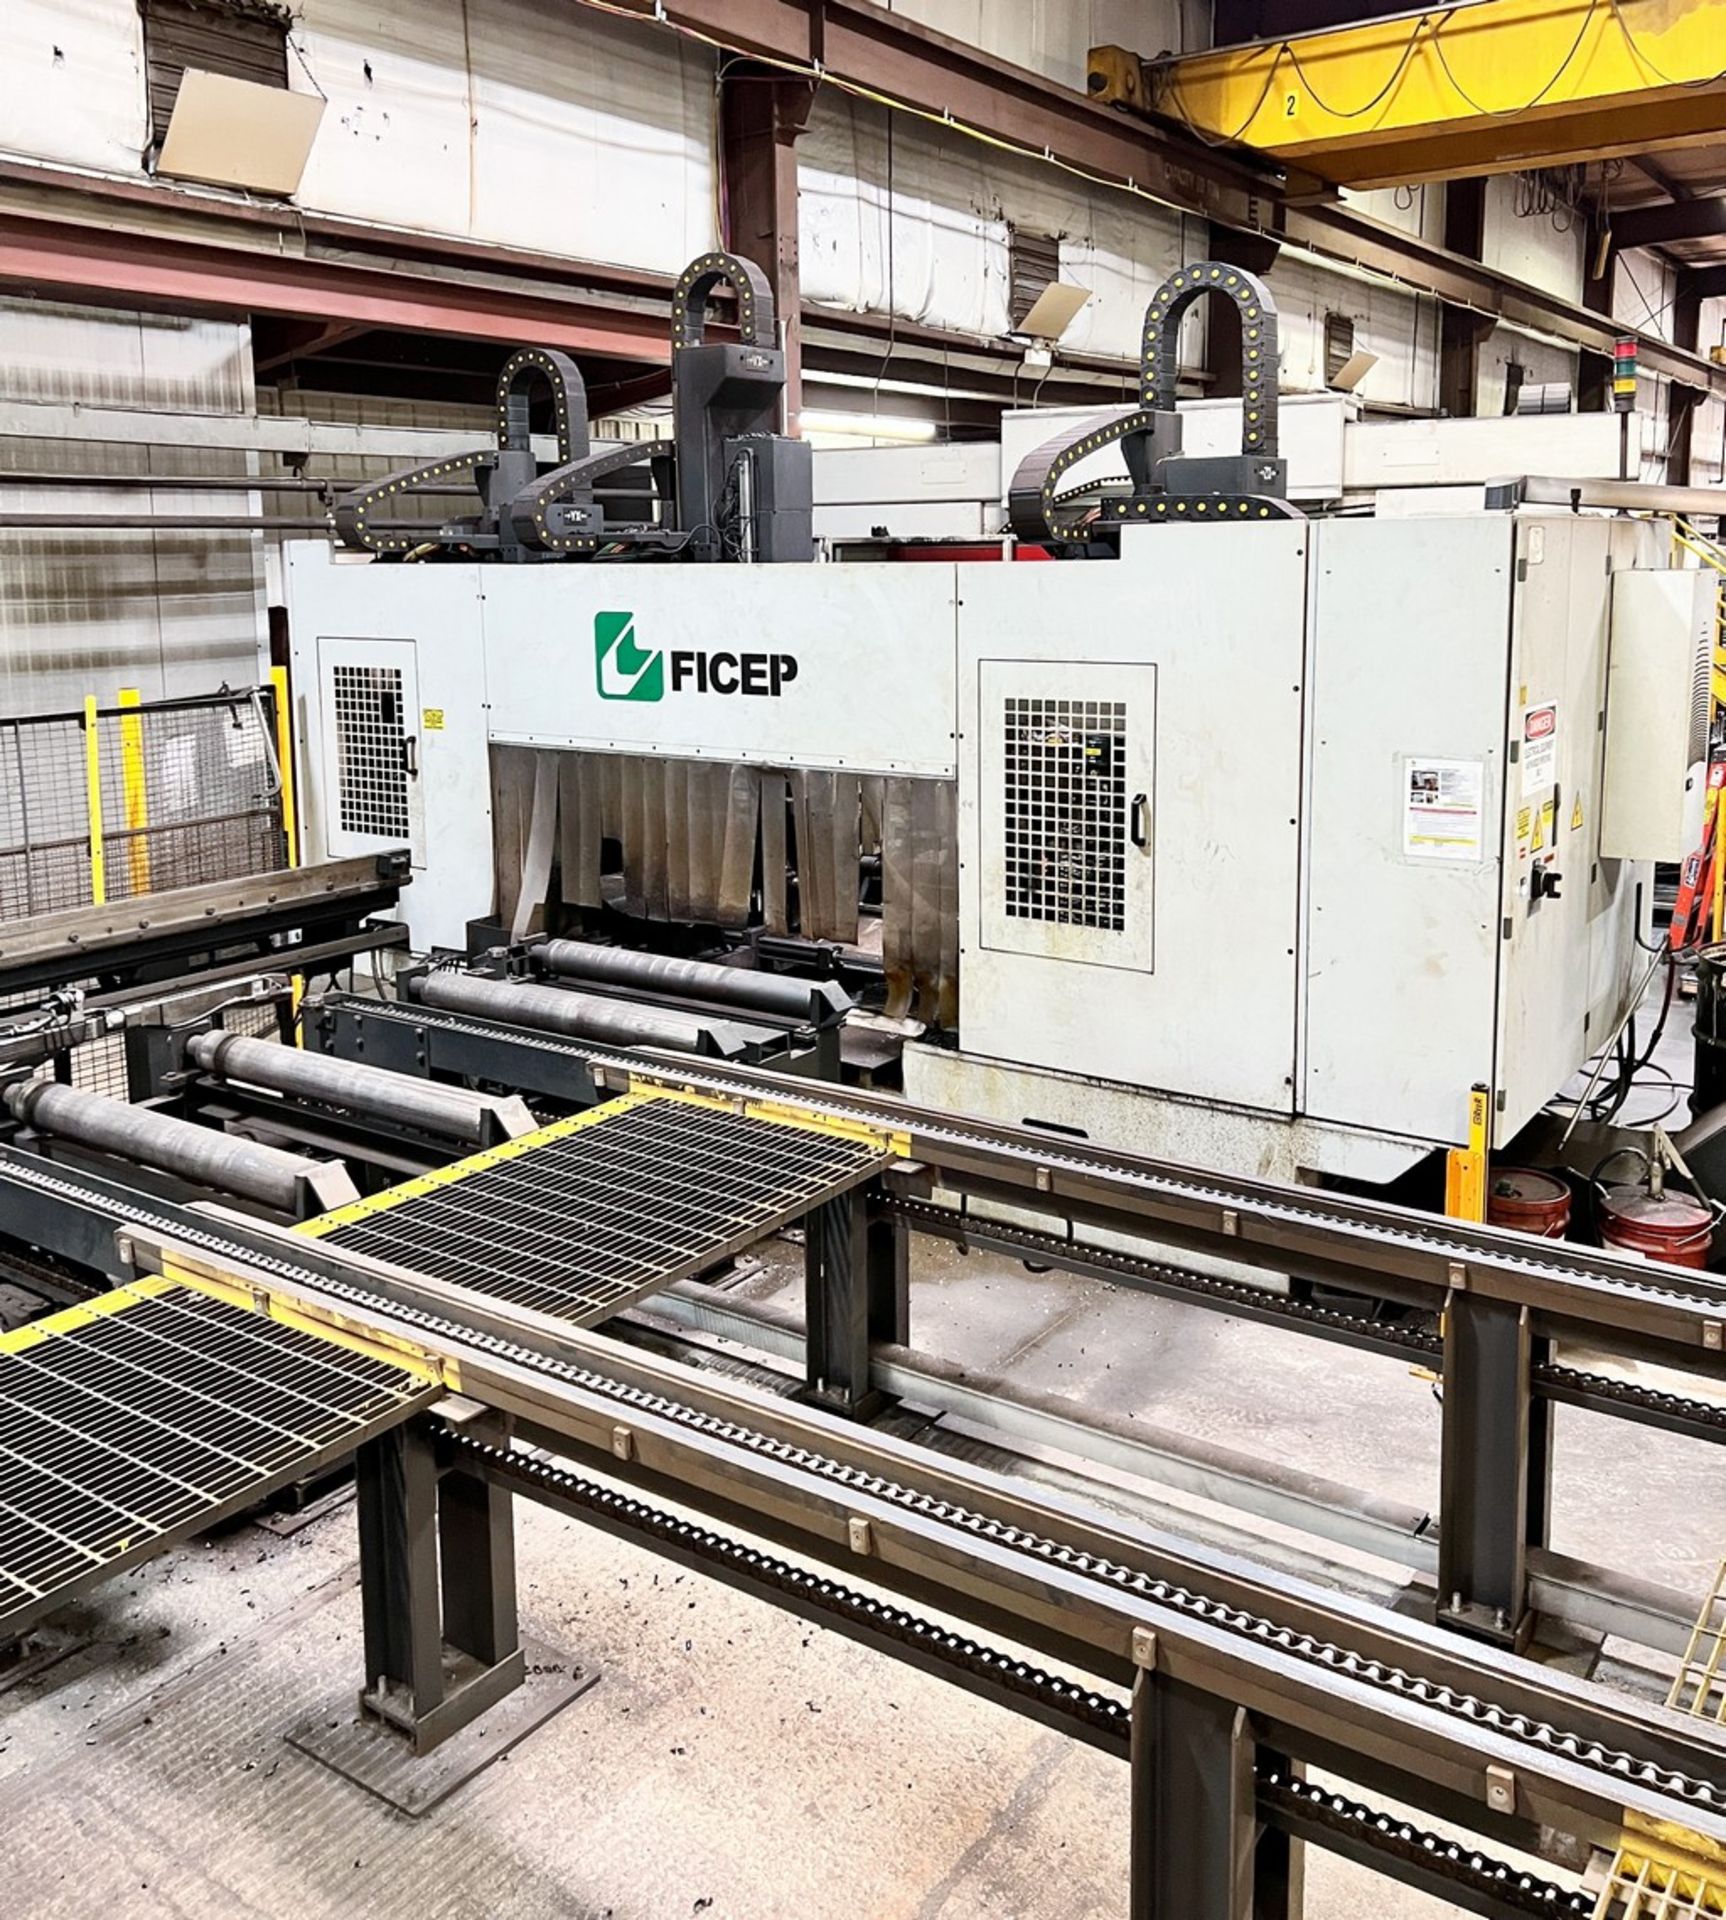 Ficep 1203 DDB CNC (3) Spindle Drilling & Saw Line, New 2014 - Image 2 of 22